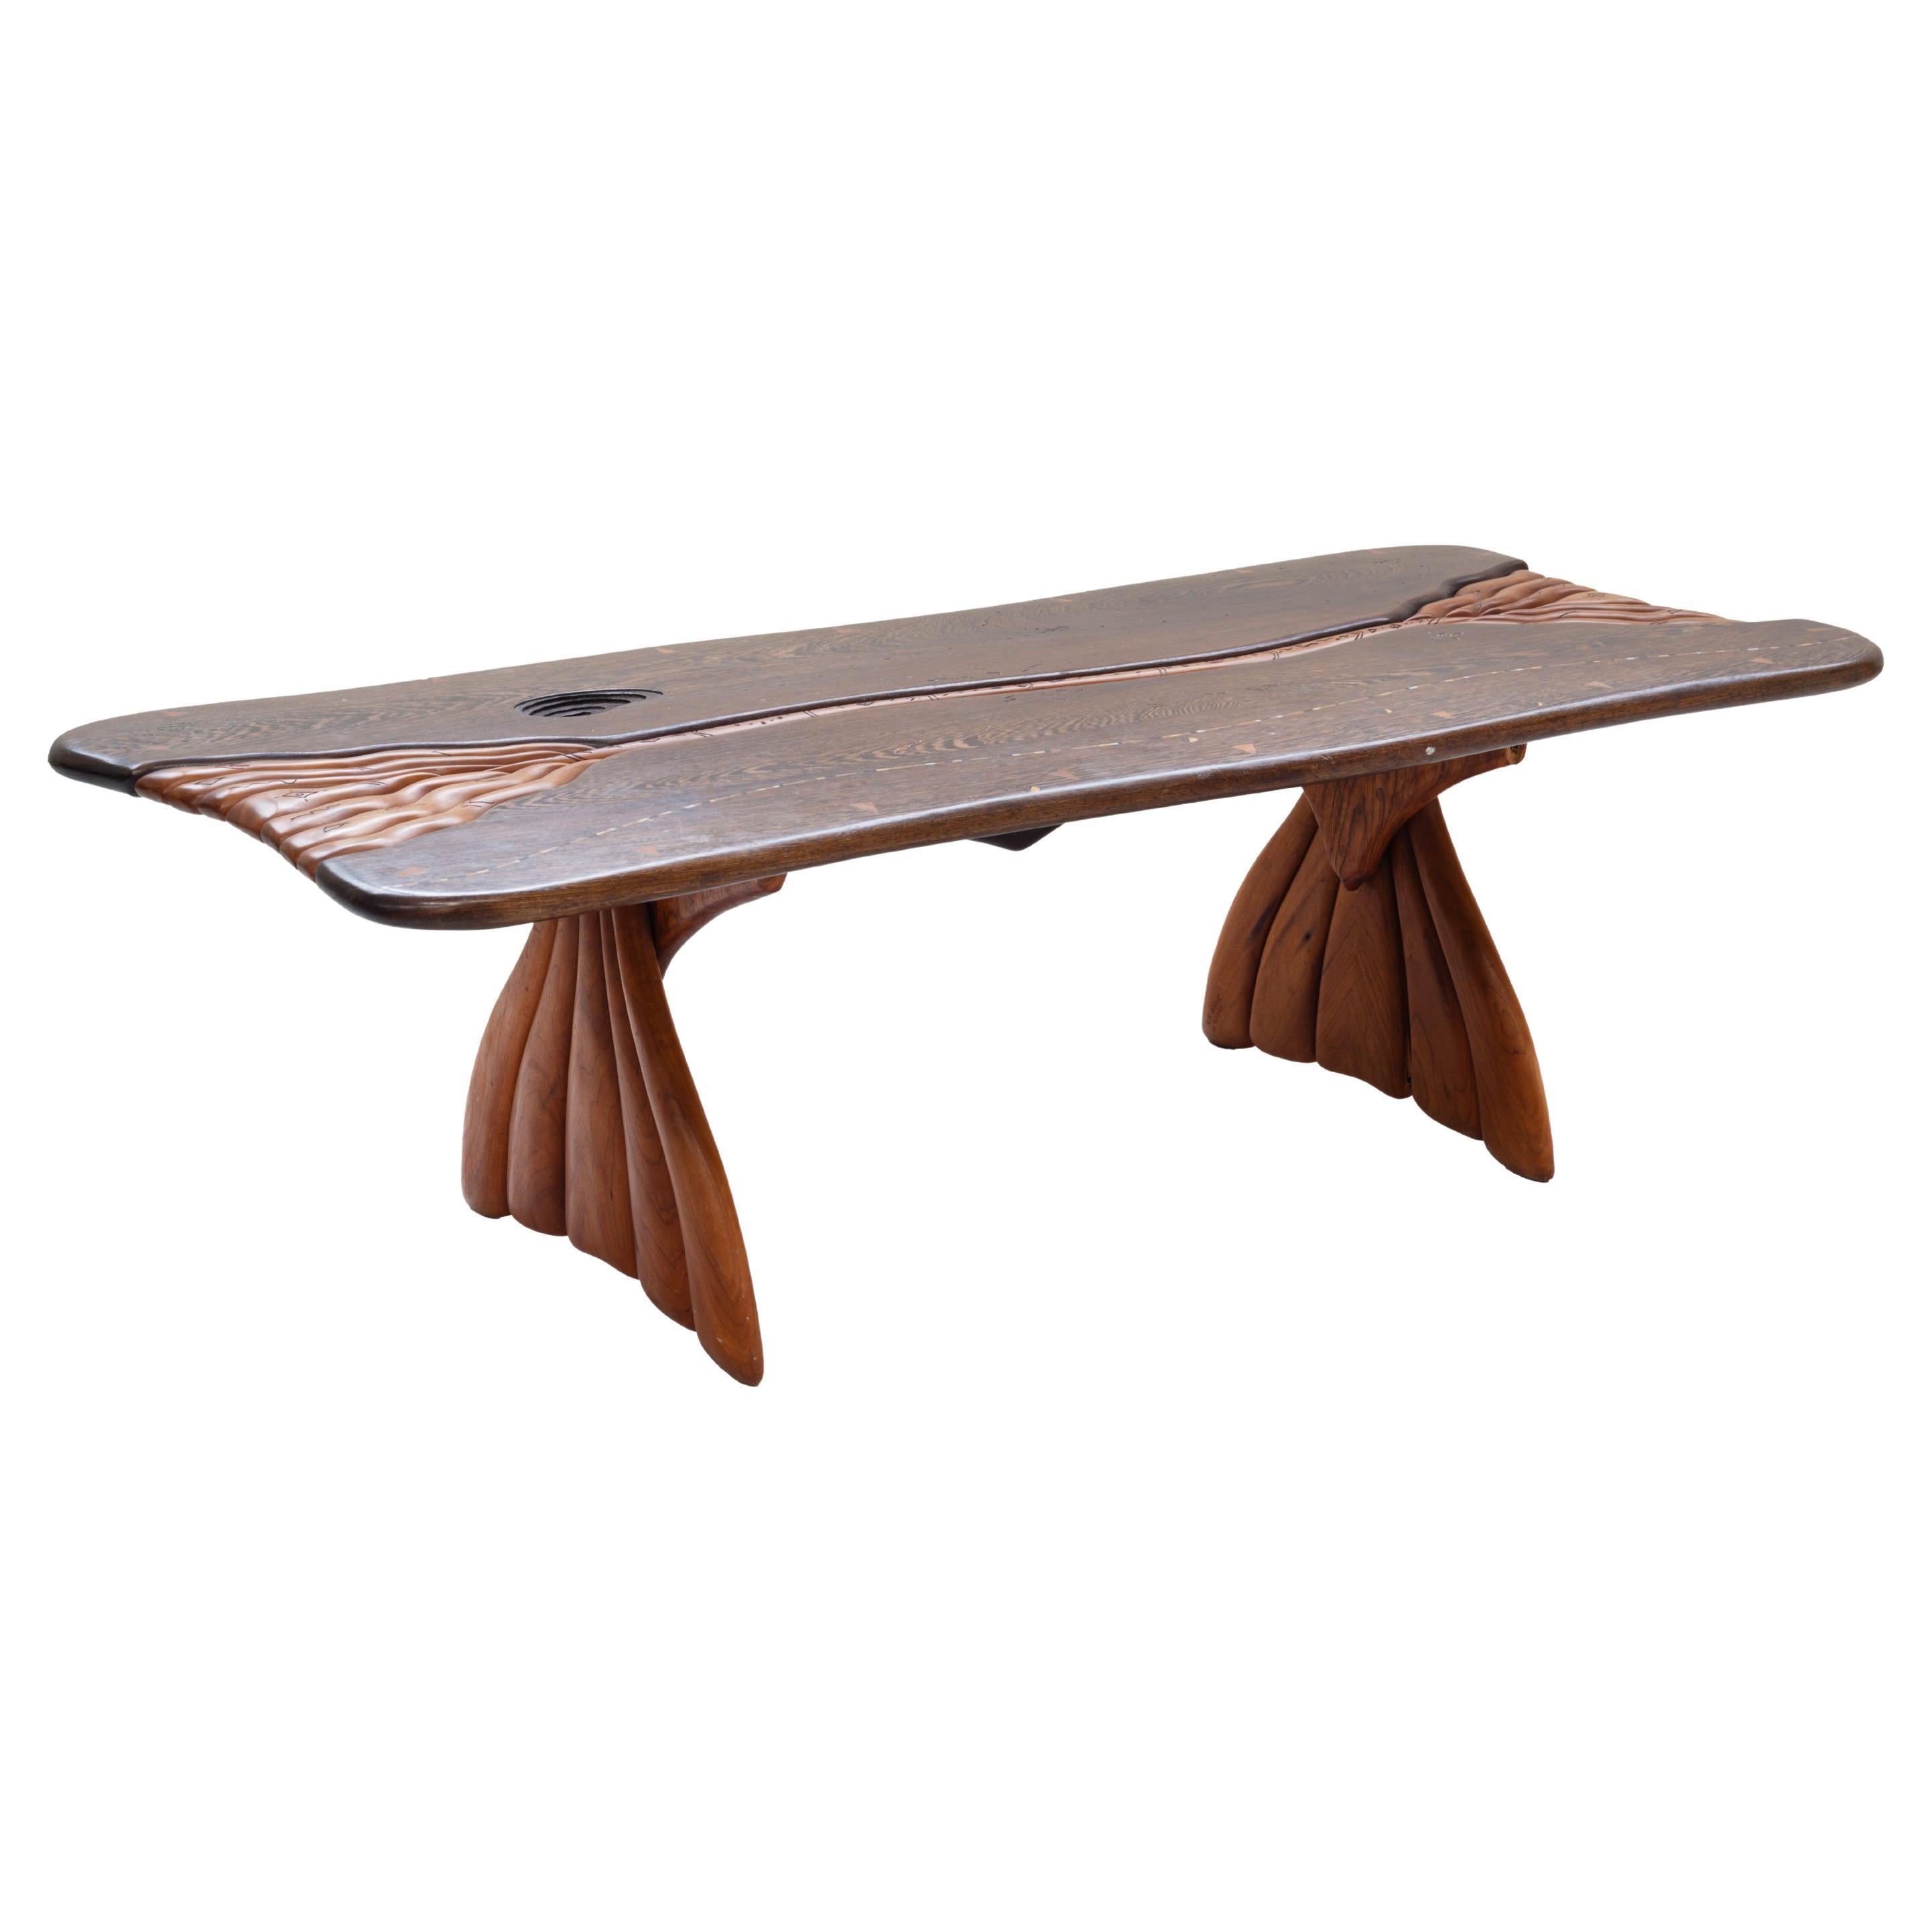 Steven Spiro Hand Carved Coffee Table